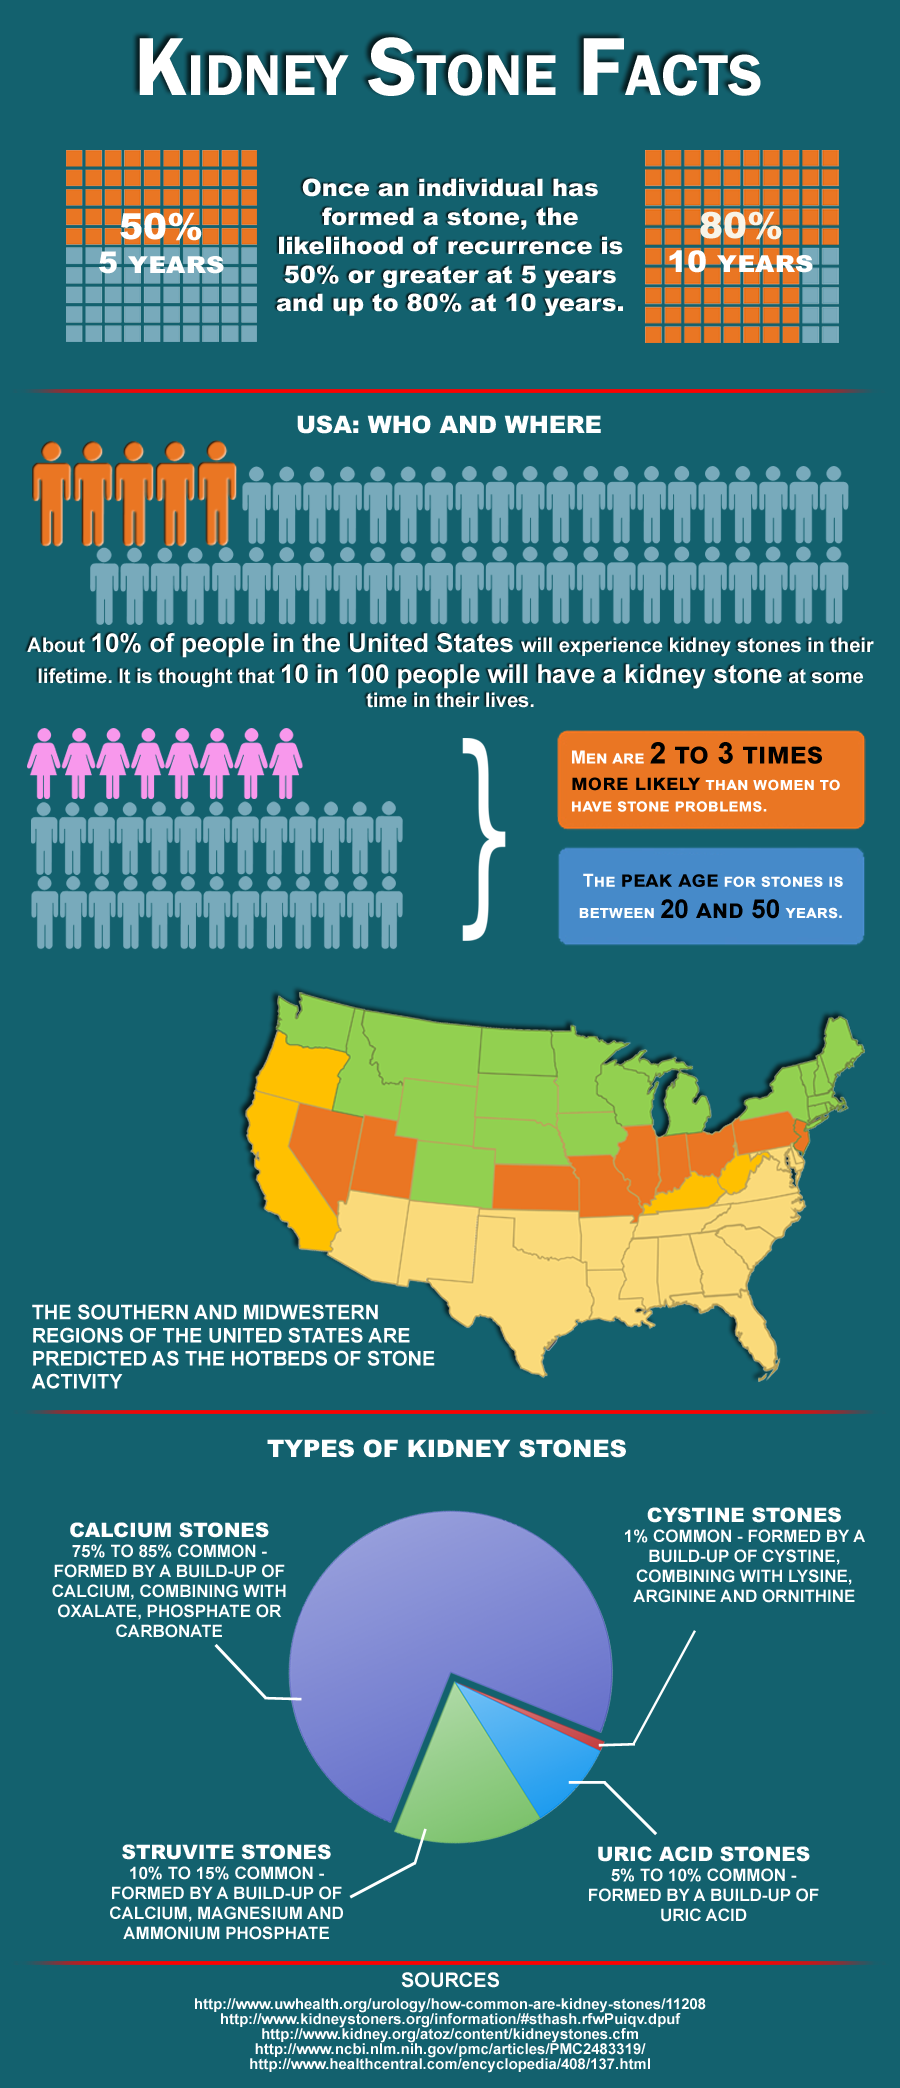 Once an individual has formed a stone, the likelihood of recurrence is 50% or greater at 5 years and up to 80% at 10 years. About 10% of people in the United States will experience kidney stones in their lifetime. lt is thought that 10 in 100 people will have a kidney stone at some time in their lives. Men are 2 to 3 times more likely than women to have stone problems. The peak age for stones is between 20 and 50 years. the southern and midwestern regions of the United States are predicted as the hotbeds of stone activity. Calcium stones 75% to 85% common - formed by a build-up of calcium, combining with oxalate, phosphate or carbonate. Struvite stones 10% to 15% common - formed by a build-up of calcium, magnesium and ammonium phosphate. Uric acid stones 5% to 10% common - formed by a build-up of uric acid. rginine and ornithine.http://www.uwhealth.org/urology/how-common-are-kidney-stones/11208 http://www.kidneystoners.org/information/#sthash.rfwPuiqv.dpuf http://www.kidney.org/atoz/content/kidneystones.cfm http://www.ncbi.nlm.nih.gov/pmc/articles/PMC2483319/ http://www.healthcentral.com/encyclopedia/408/137.html